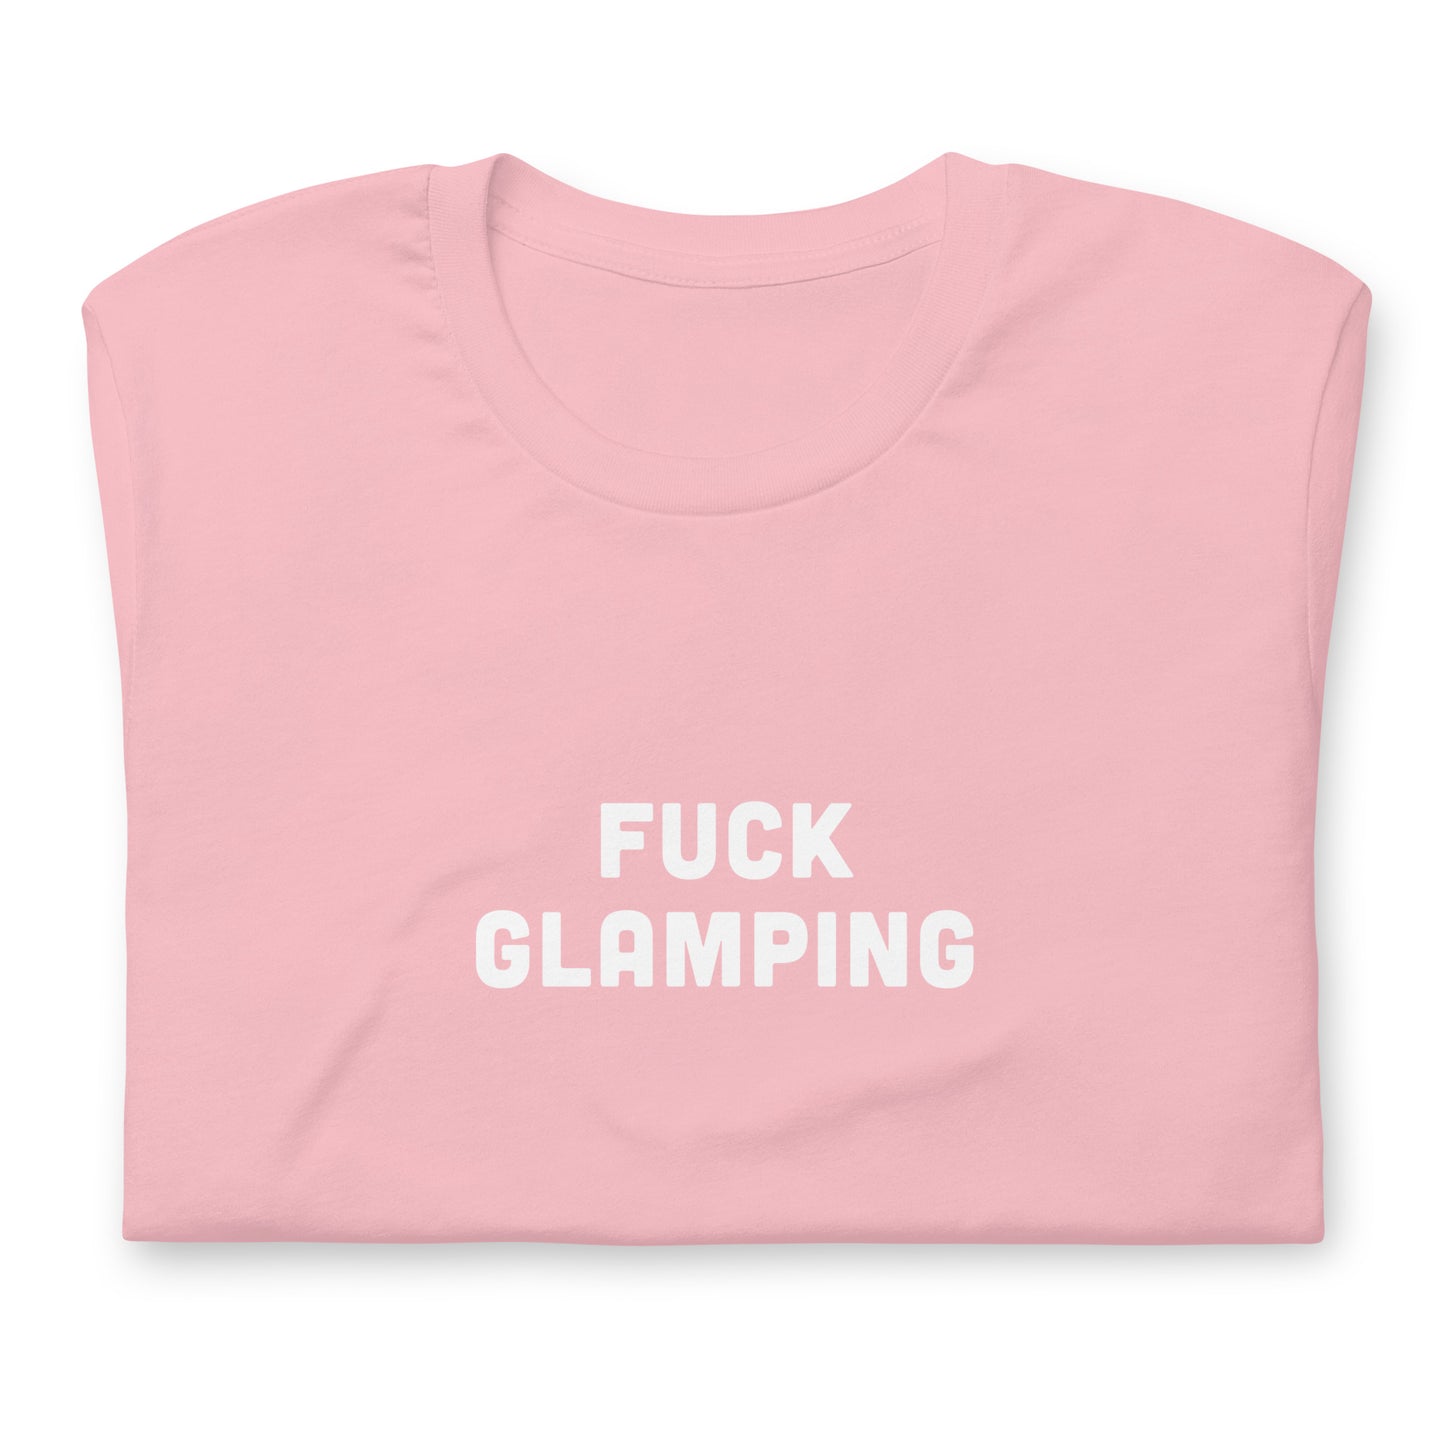 Fuck Glamping T-Shirt Size 2XL Color Forest